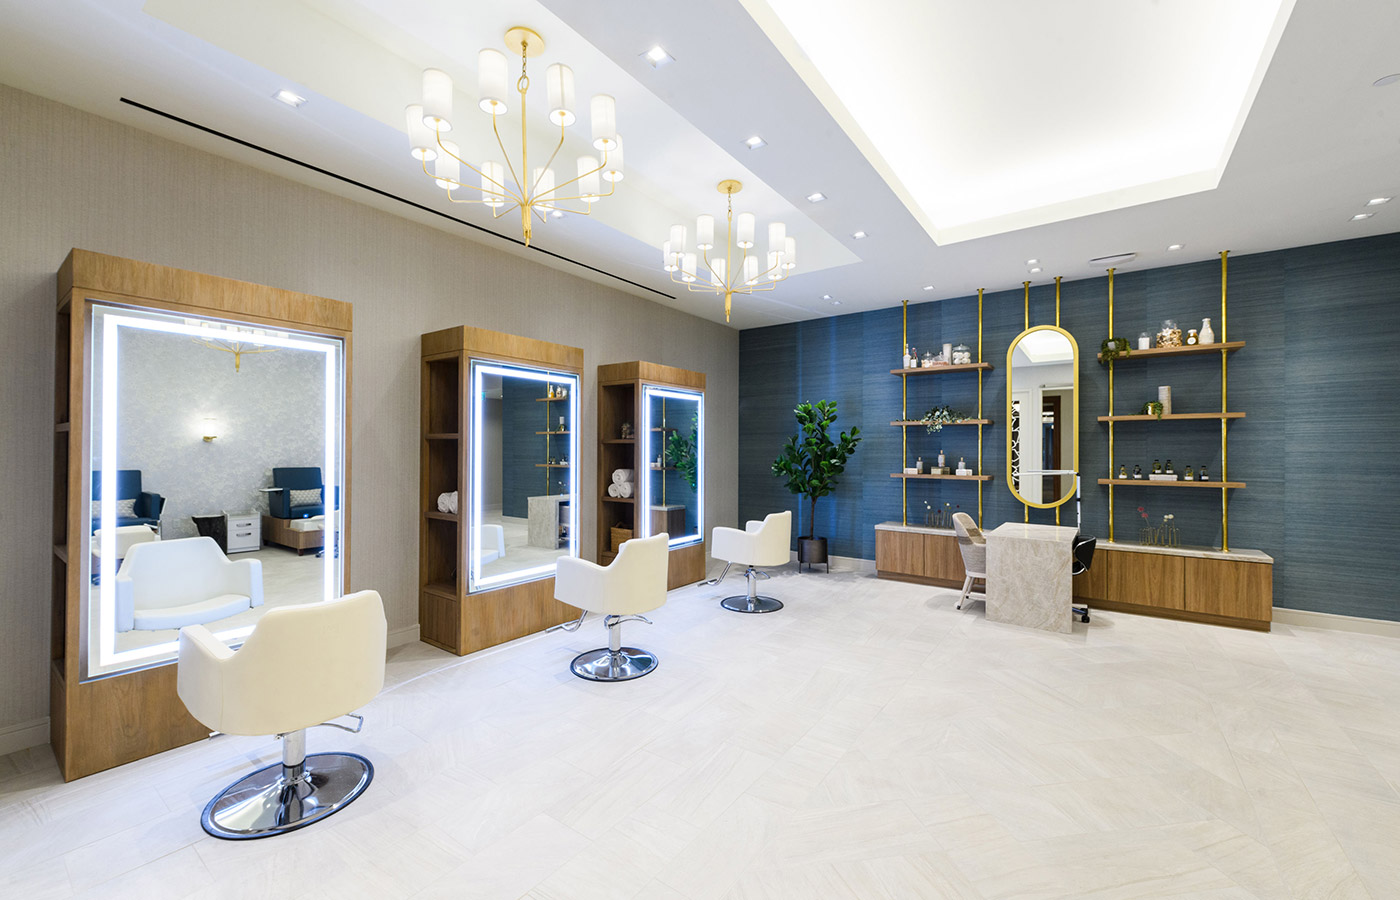 The salon at The Watermark at Houston Heights.